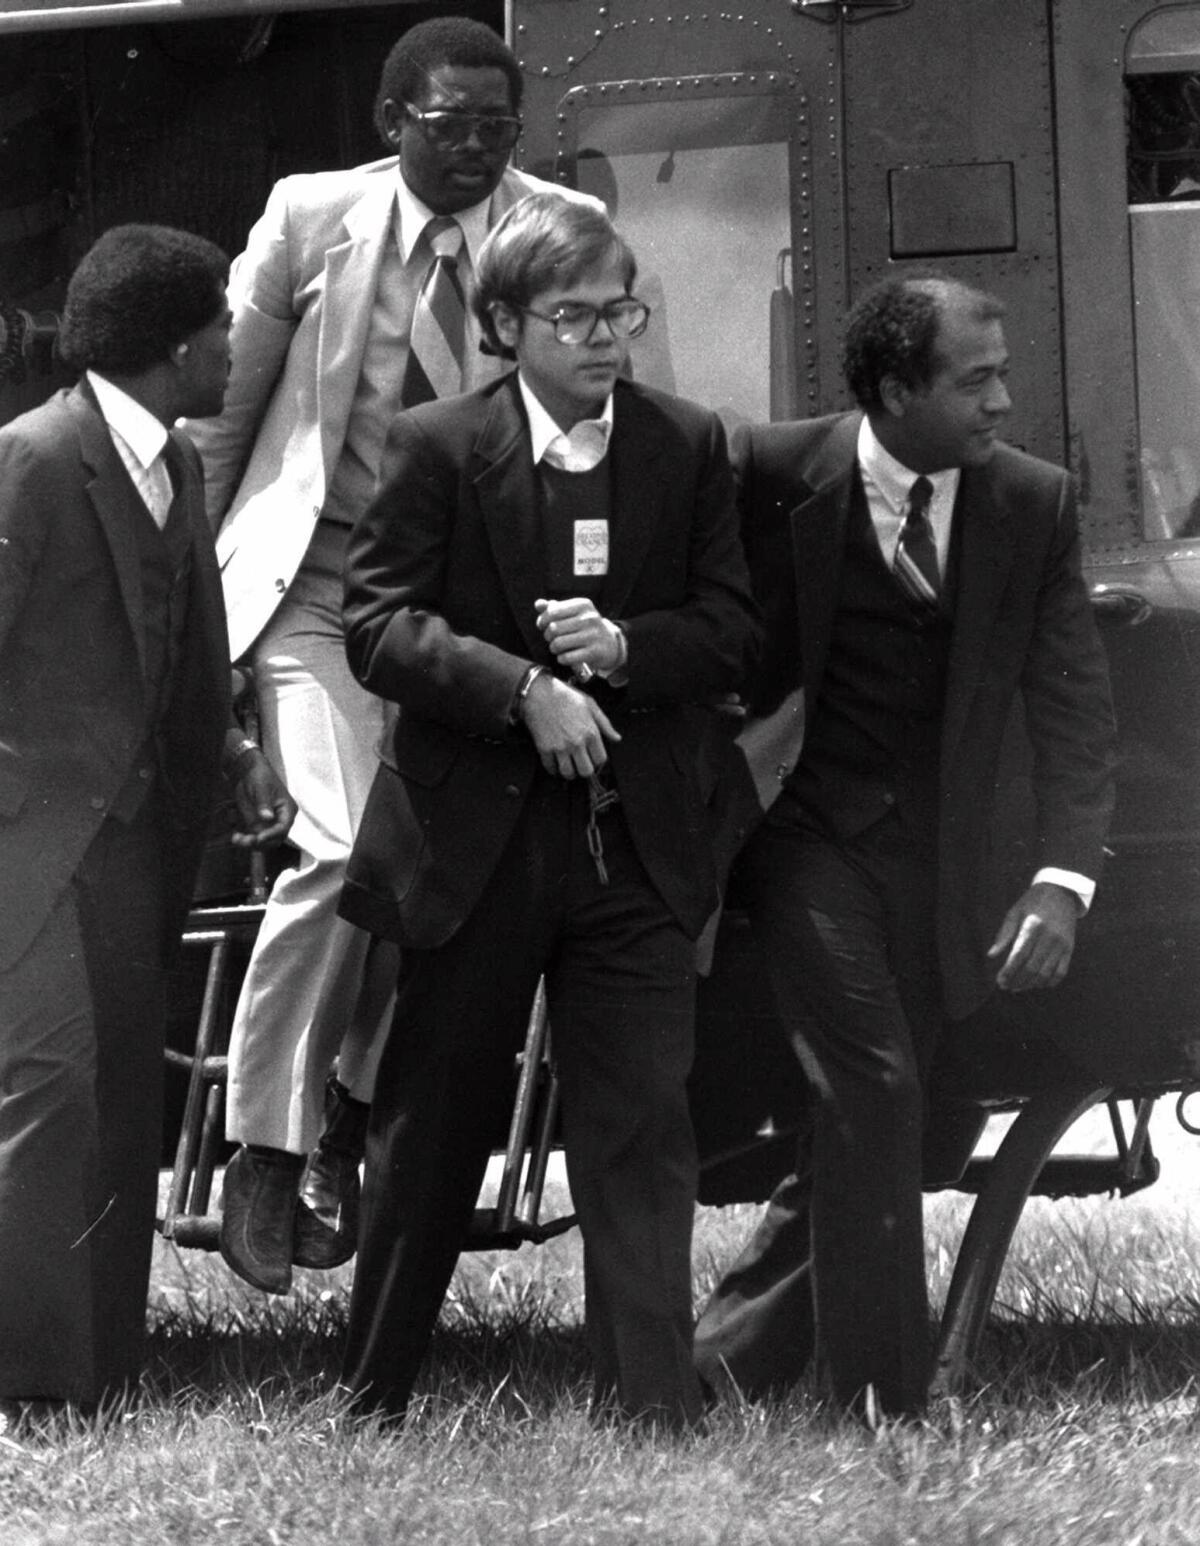 John W. Hinckley, Jr. is shown arriving in chains at Quantico Marine Base on Aug. 18, 1981.